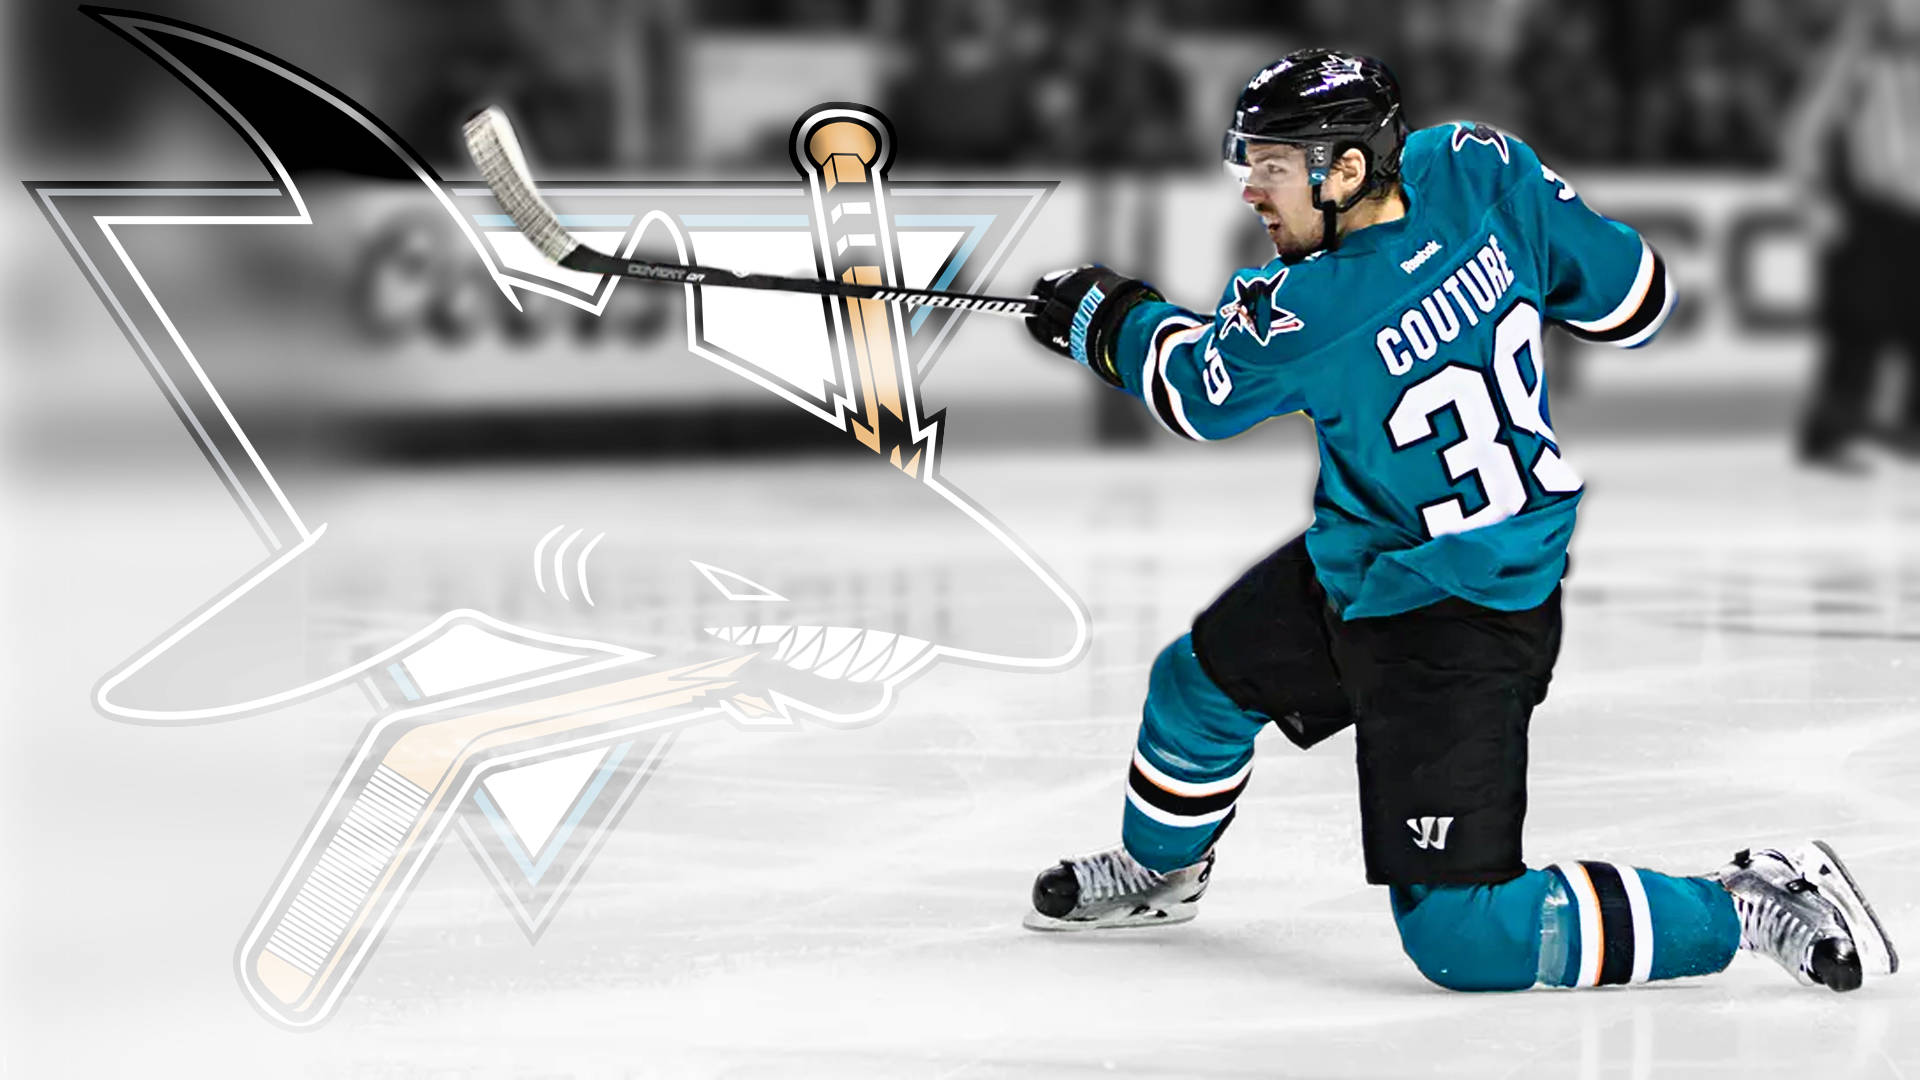 Canadian Professional Ice Hockey Center Logan Couture Logo Poster Wallpaper